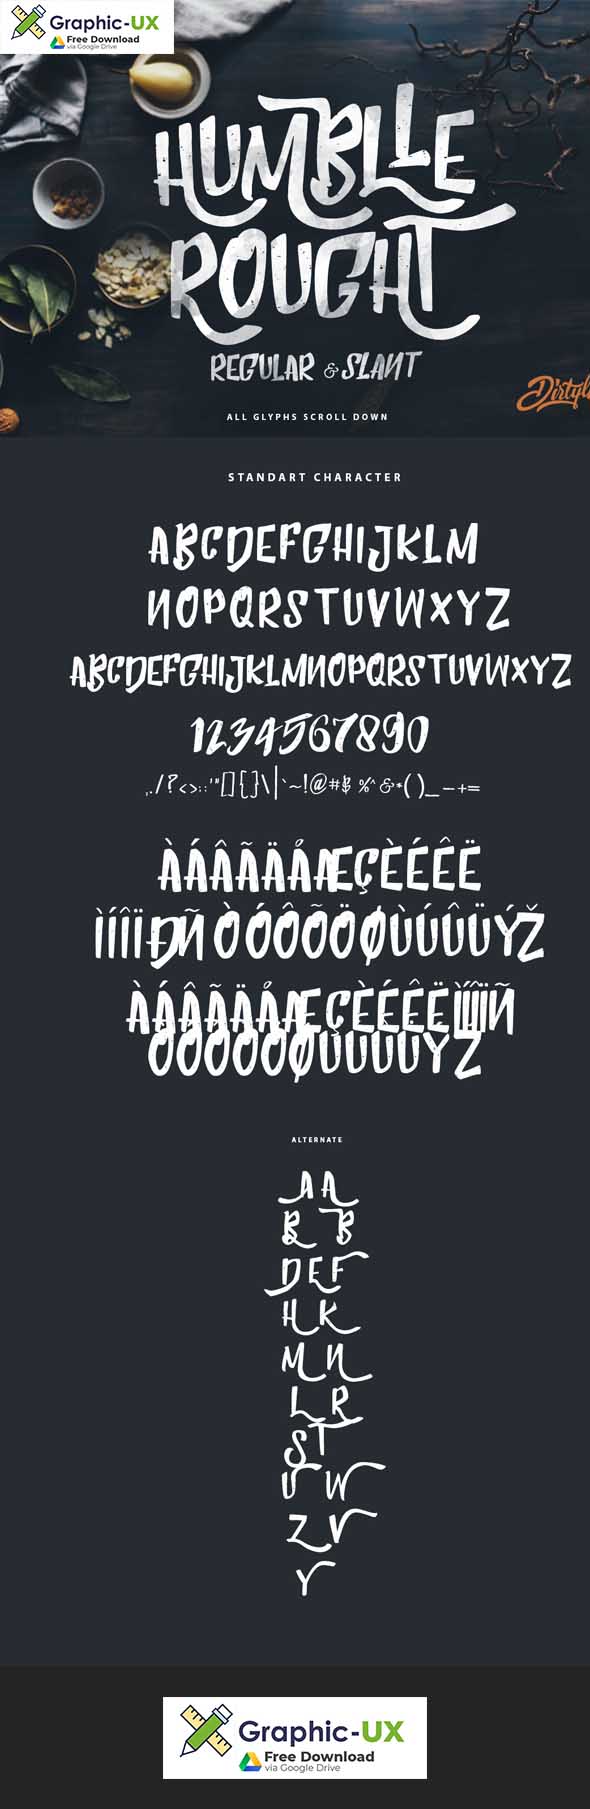 Humblle Rought Font 